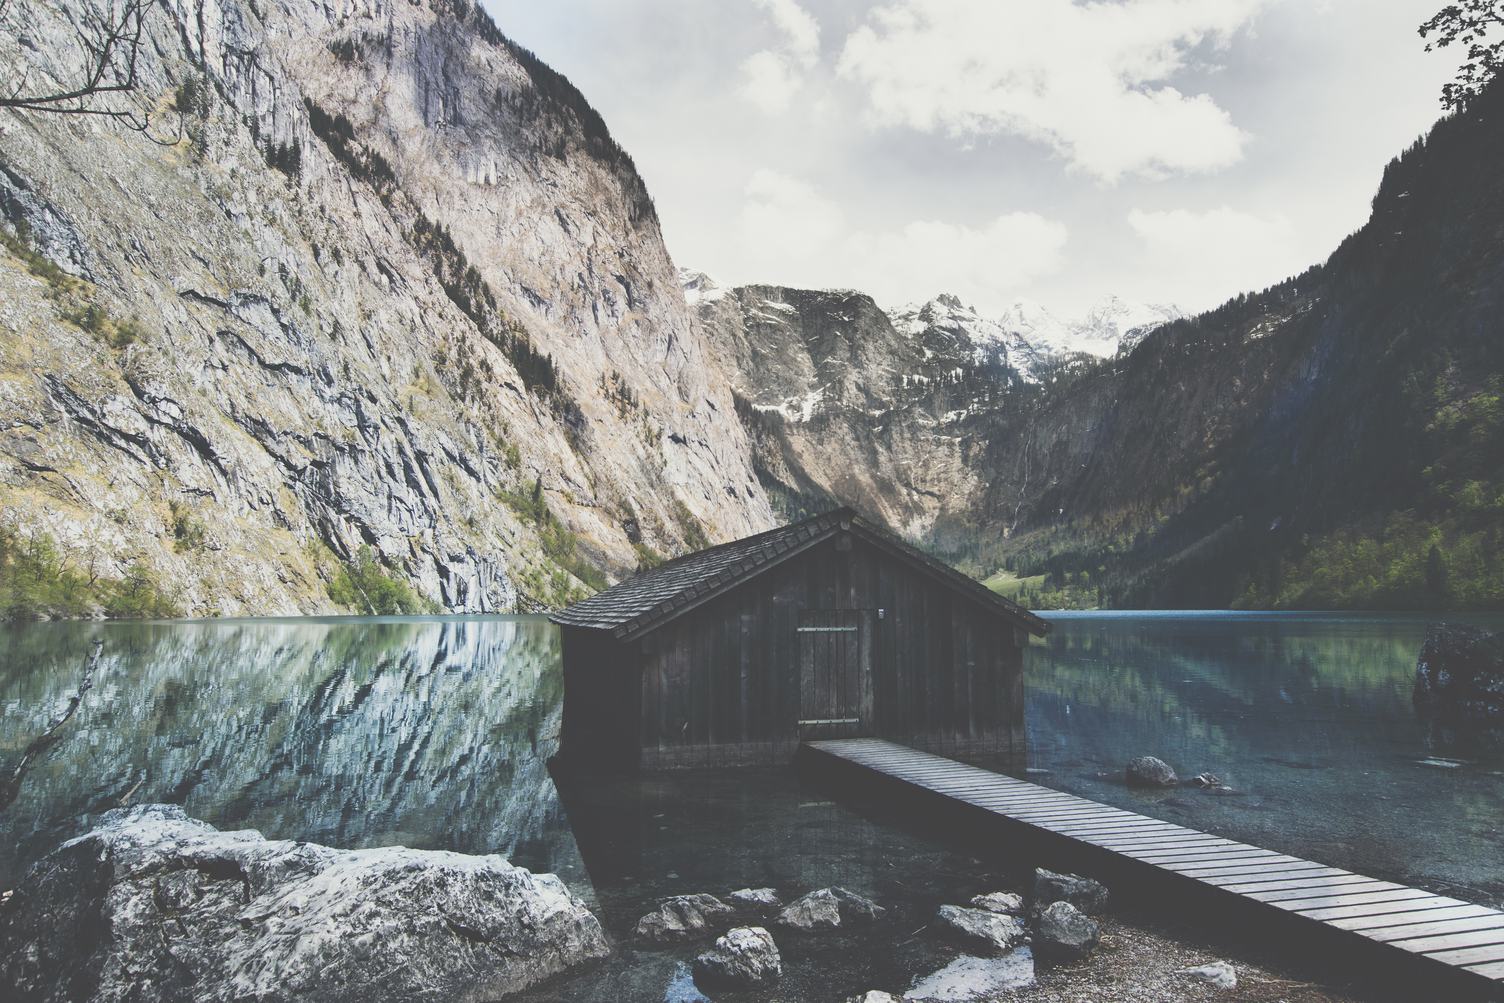 Wooden Boathouse Lake Obersee near Berchtesgaden in the German Alps